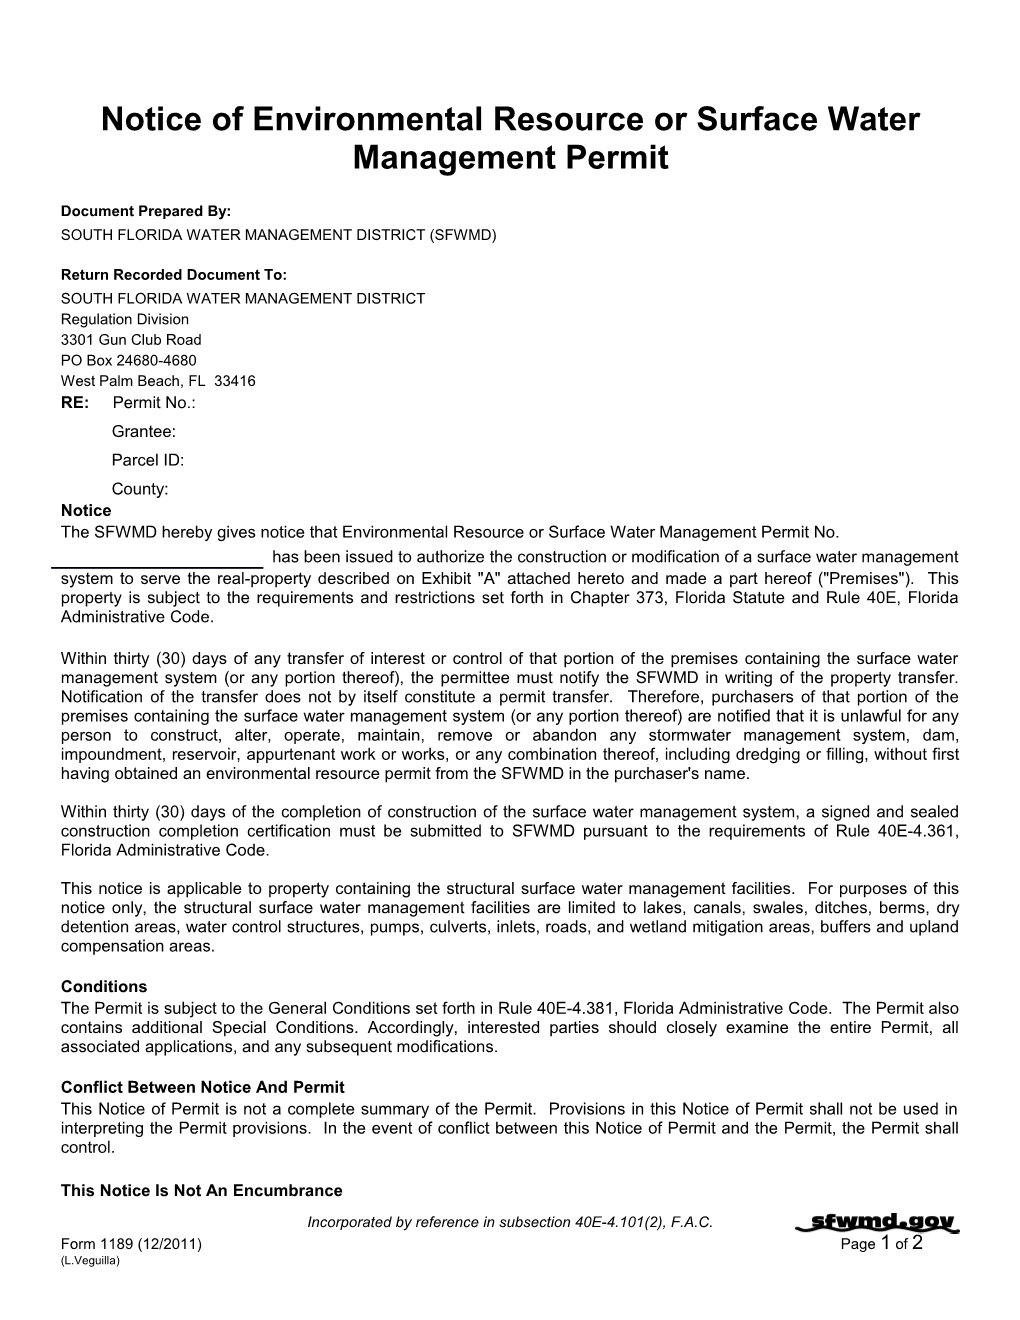 Notice of Environmental Resource Or Surface Water Management Permit